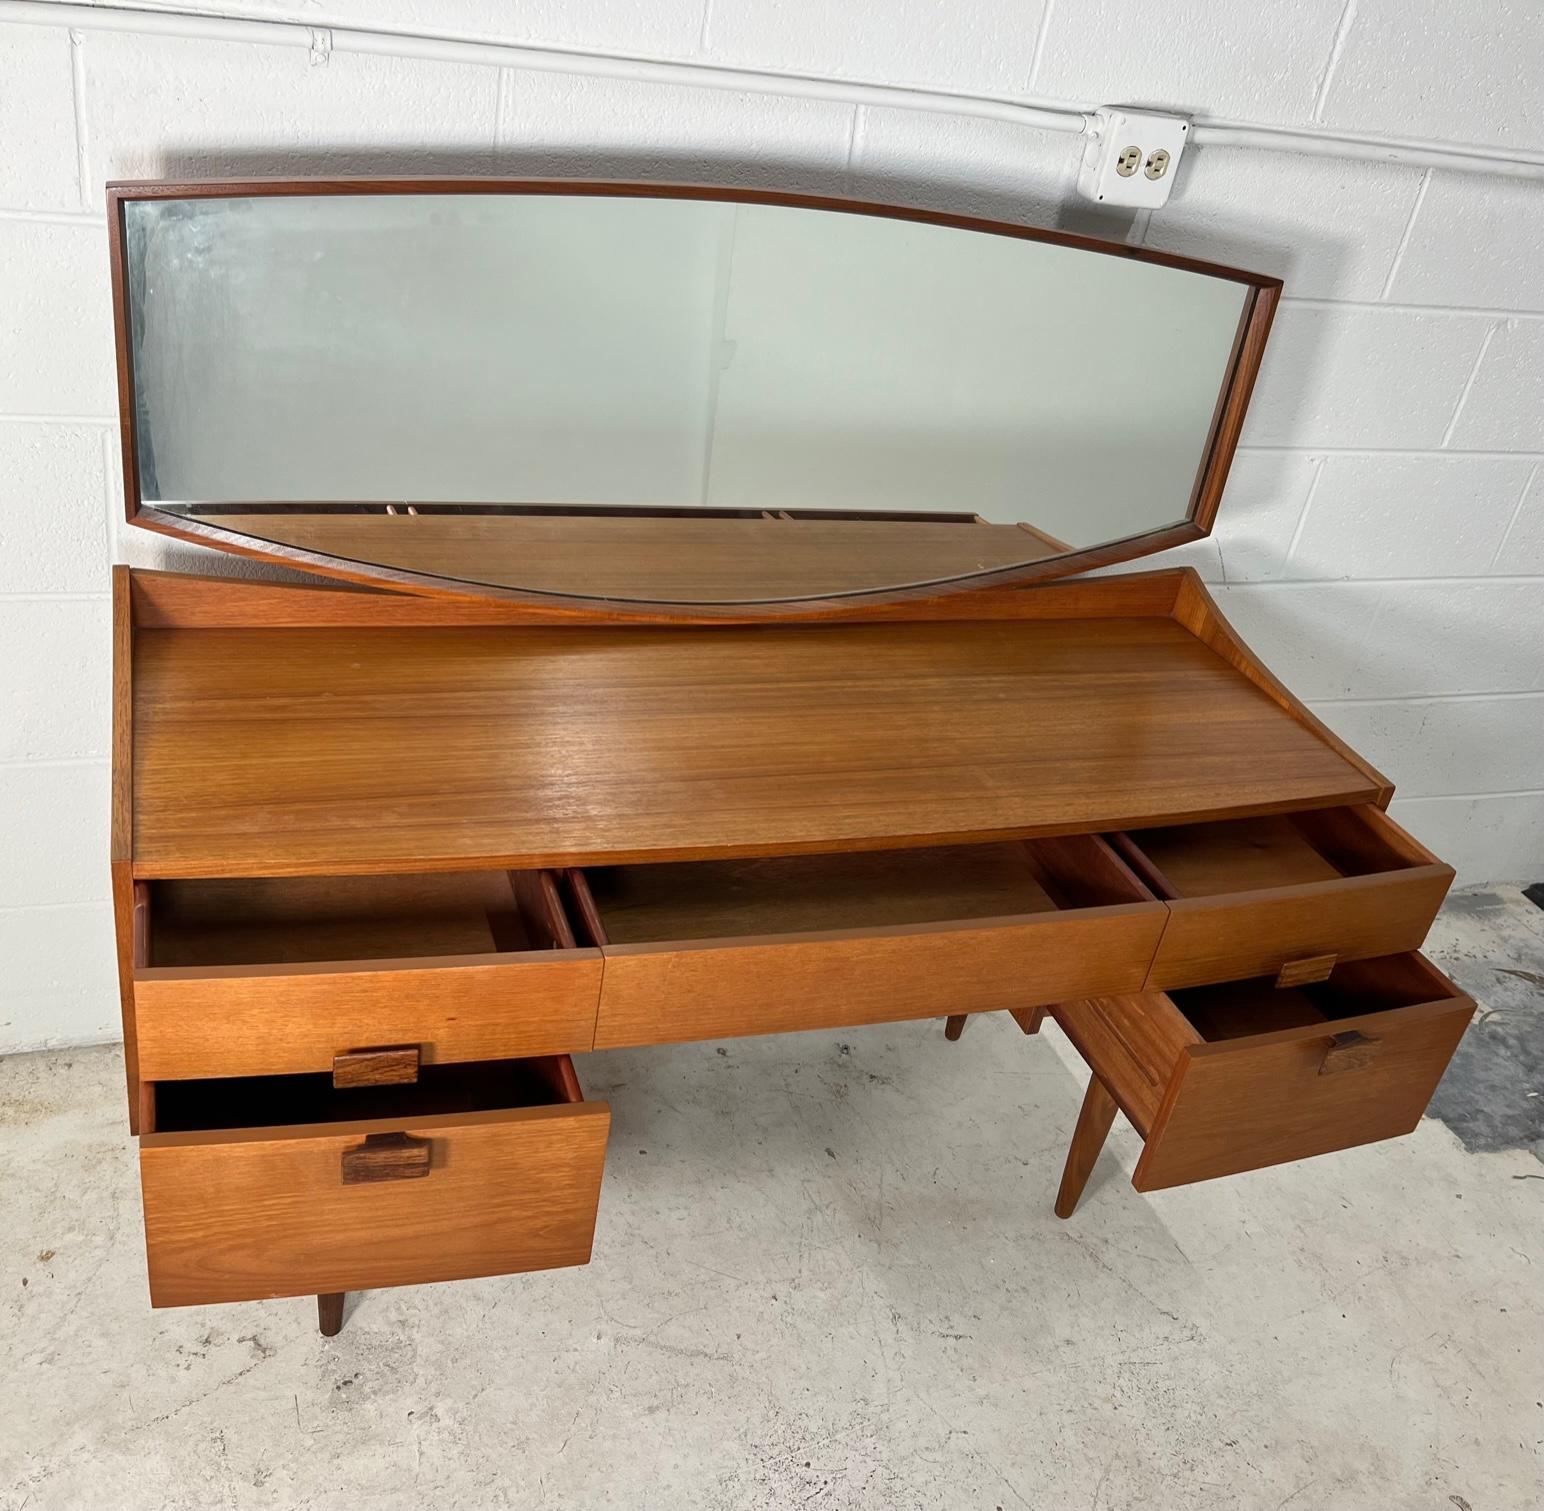 Fantastic midcentury teak veneer vanity with mirror. Designed by Danish designer Kofod-Larsen. Made by G Plan.
Features Kofod-Larsen's signature split handle design on the drawers. The handles are stained rosewood.

Very good vintage condition. All